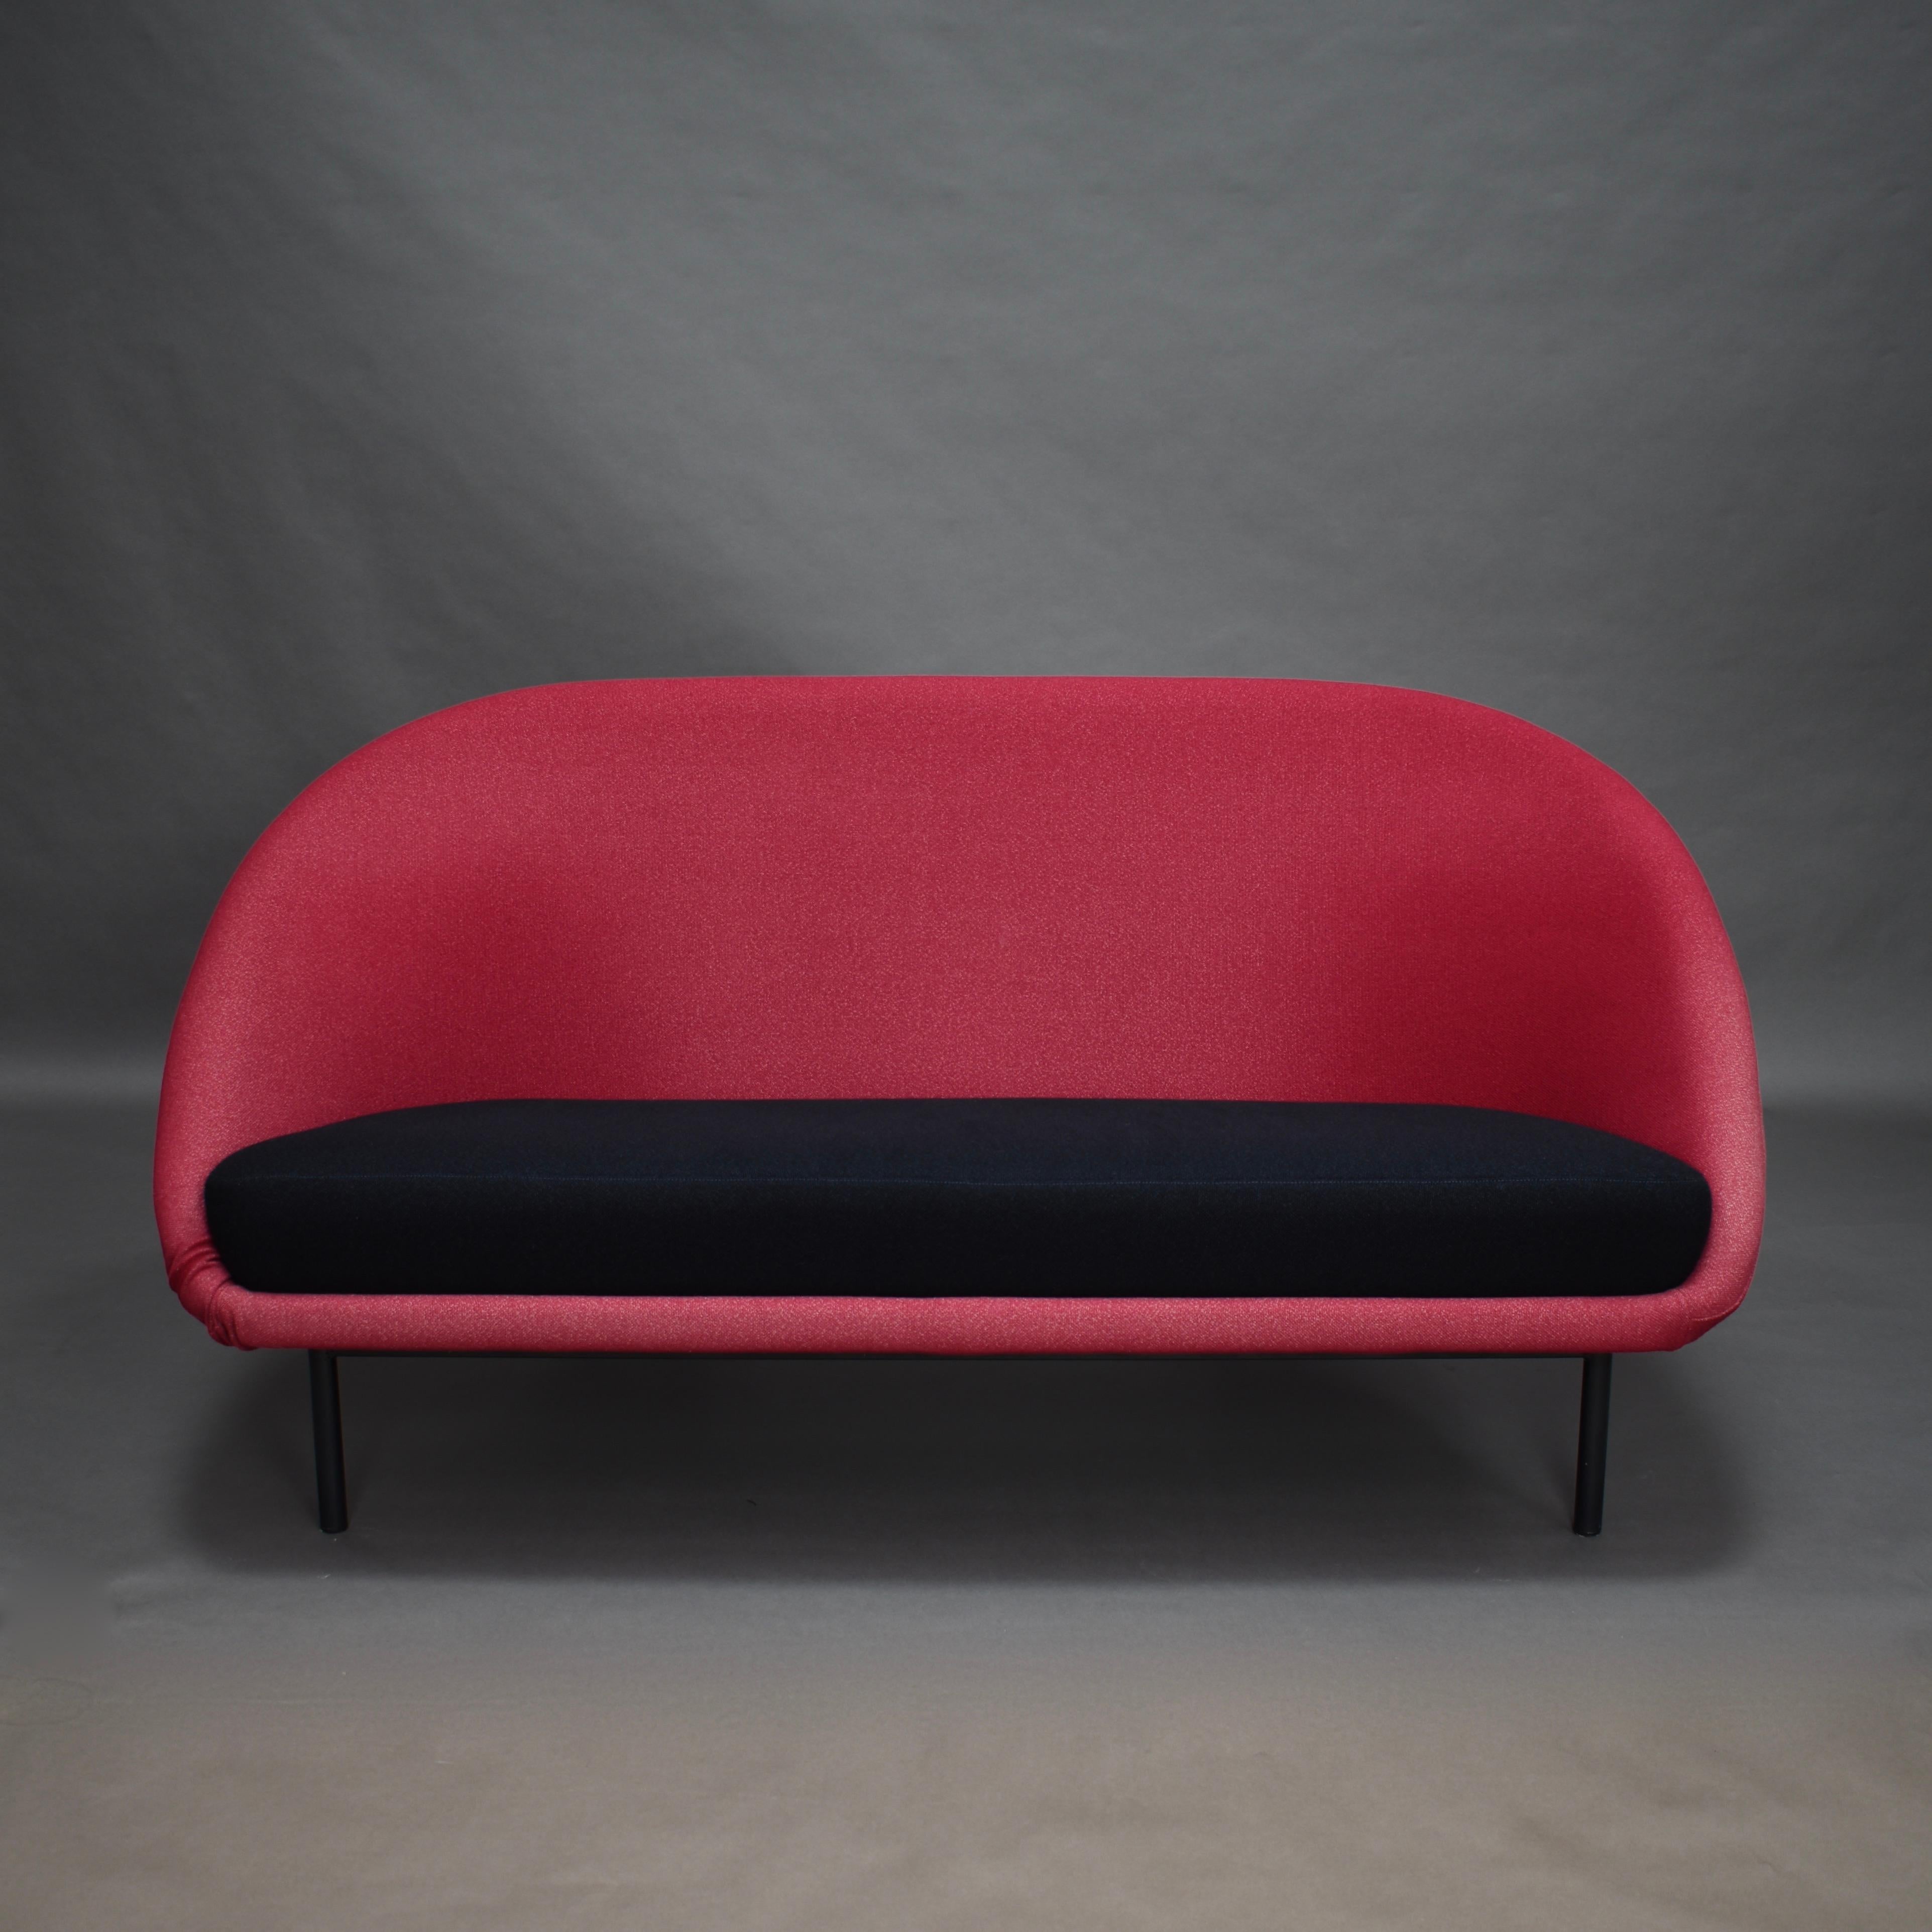 Dutch Theo Ruth f815 Sofa by Artifort, Netherlands, 1958 For Sale